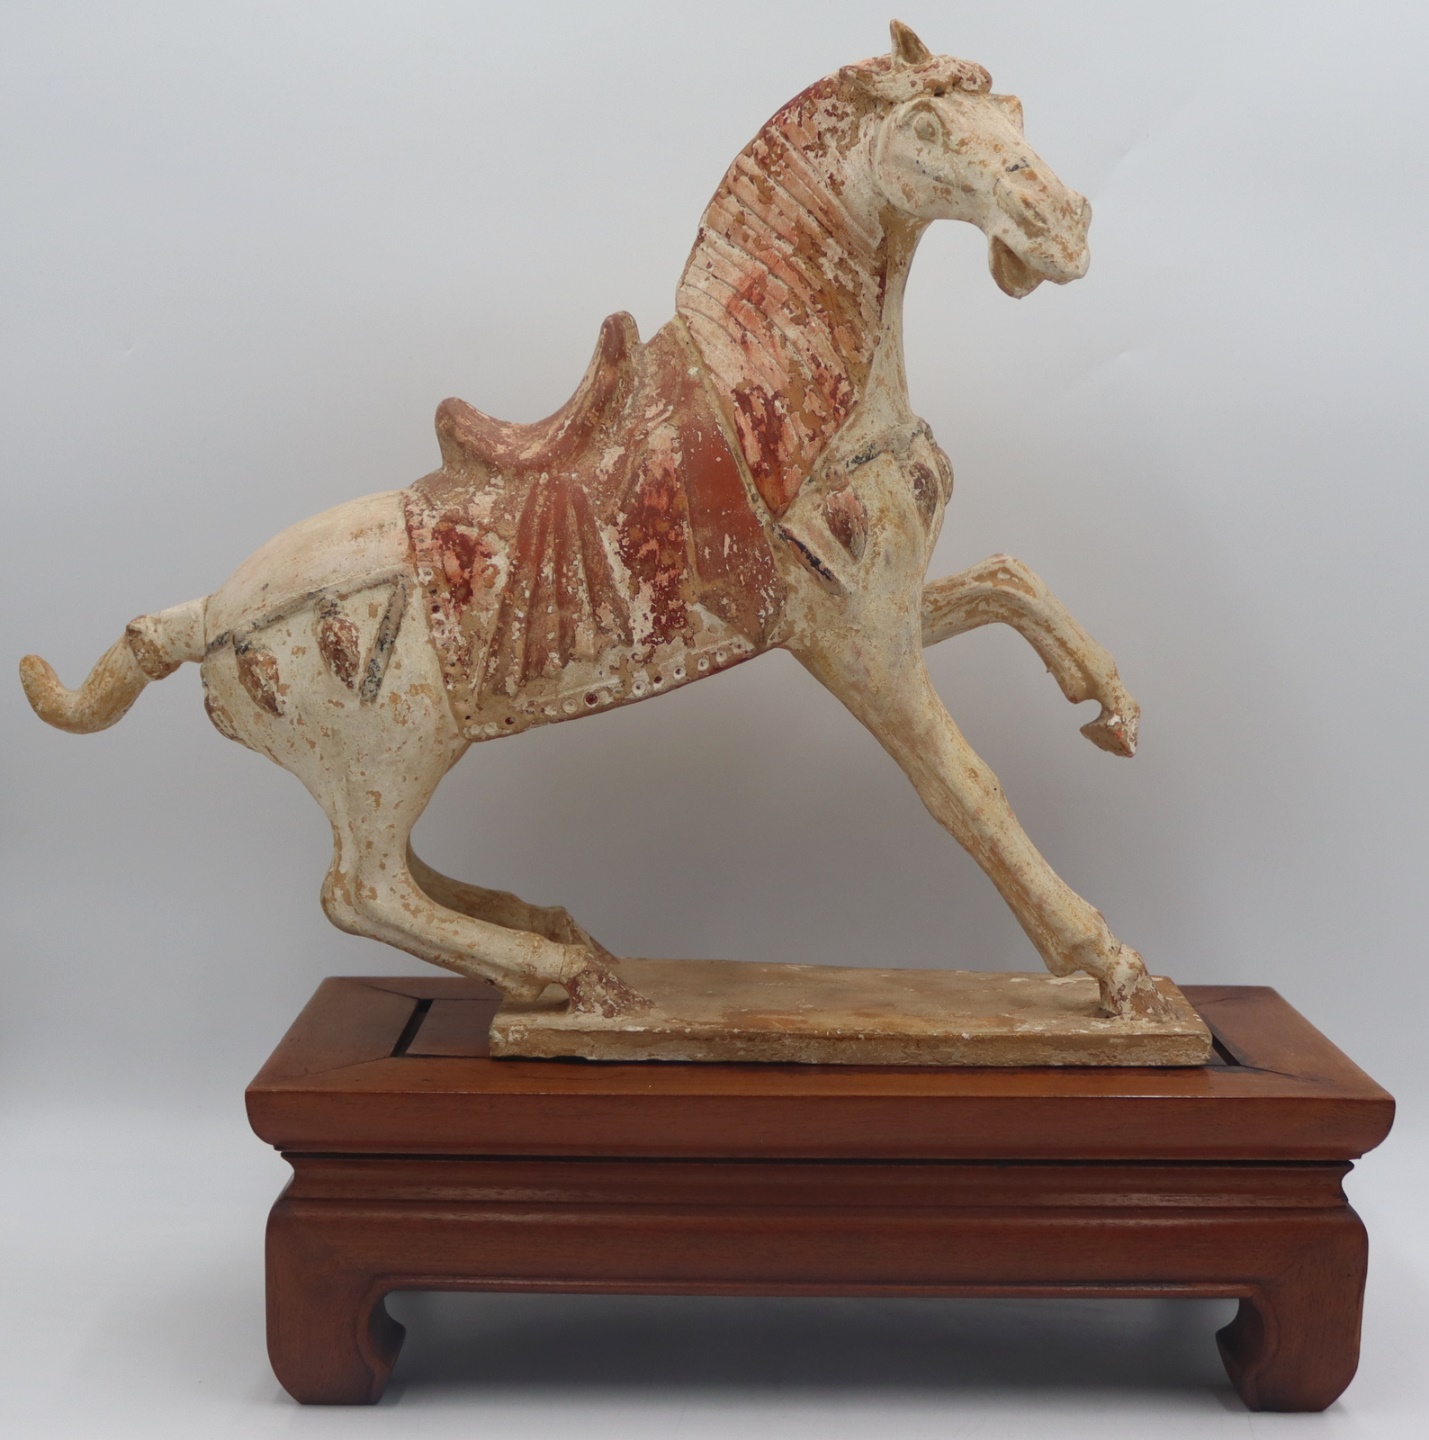 TANG STYLE HORSE ON A HARDWOOD 3bcf16